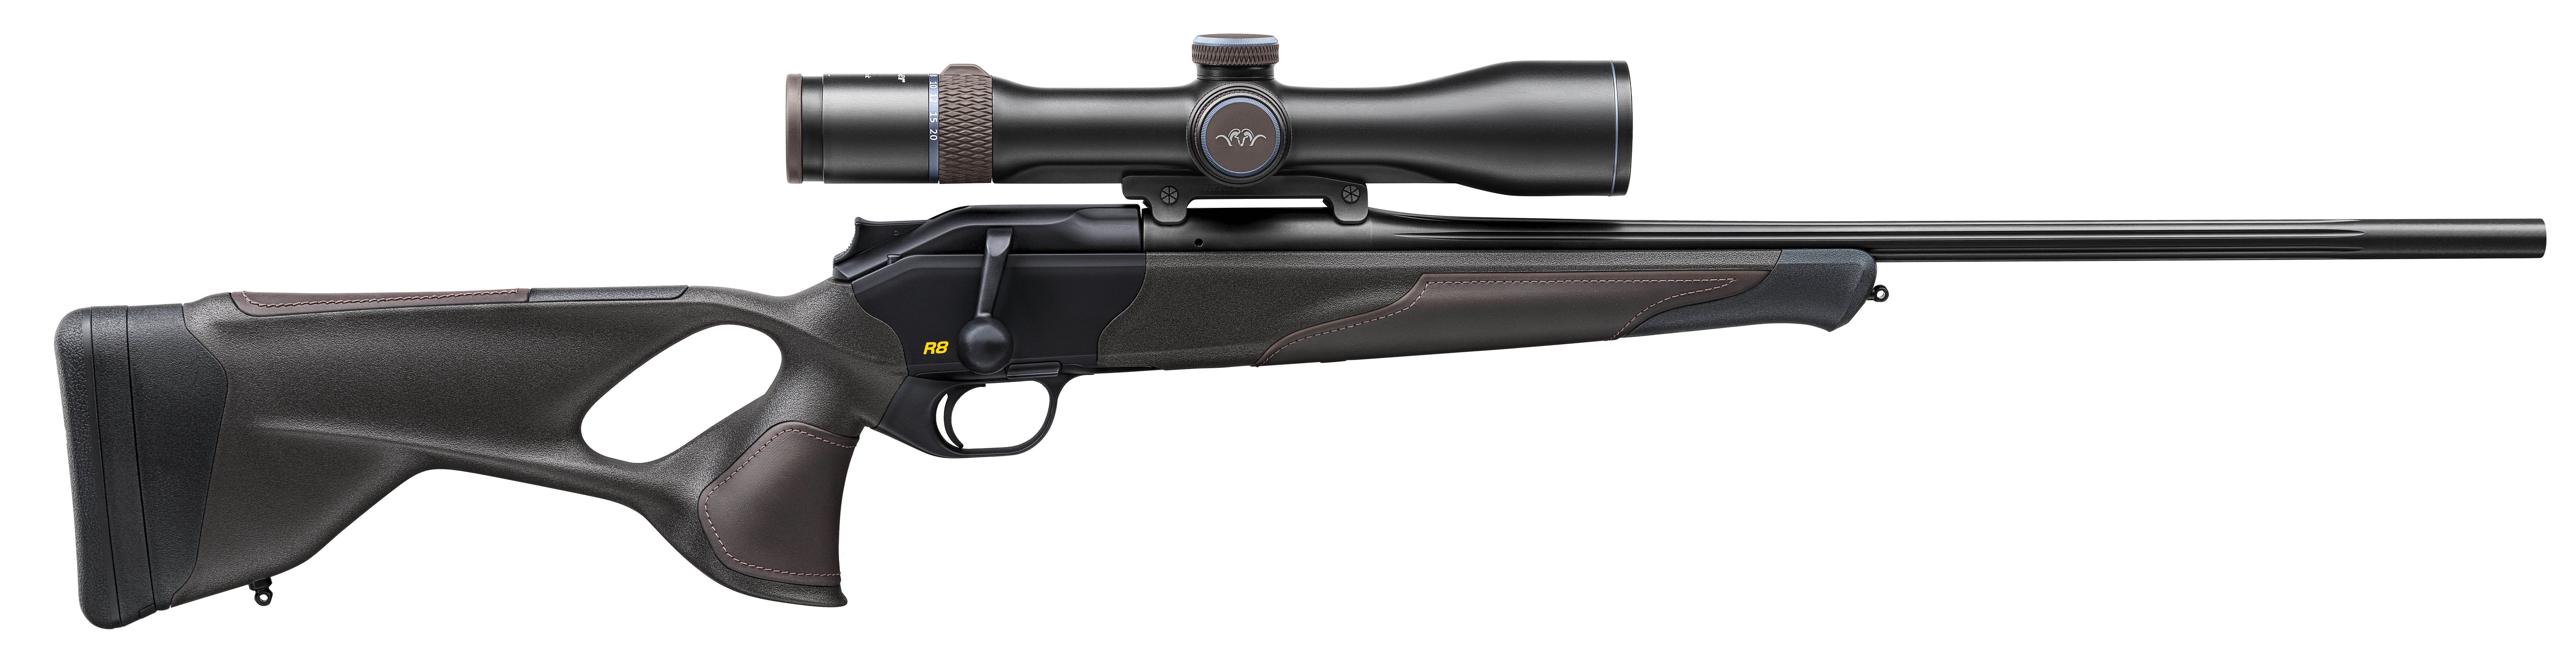 Blaser R8 Ultimate Leather Rifle - Cluny Country Guns